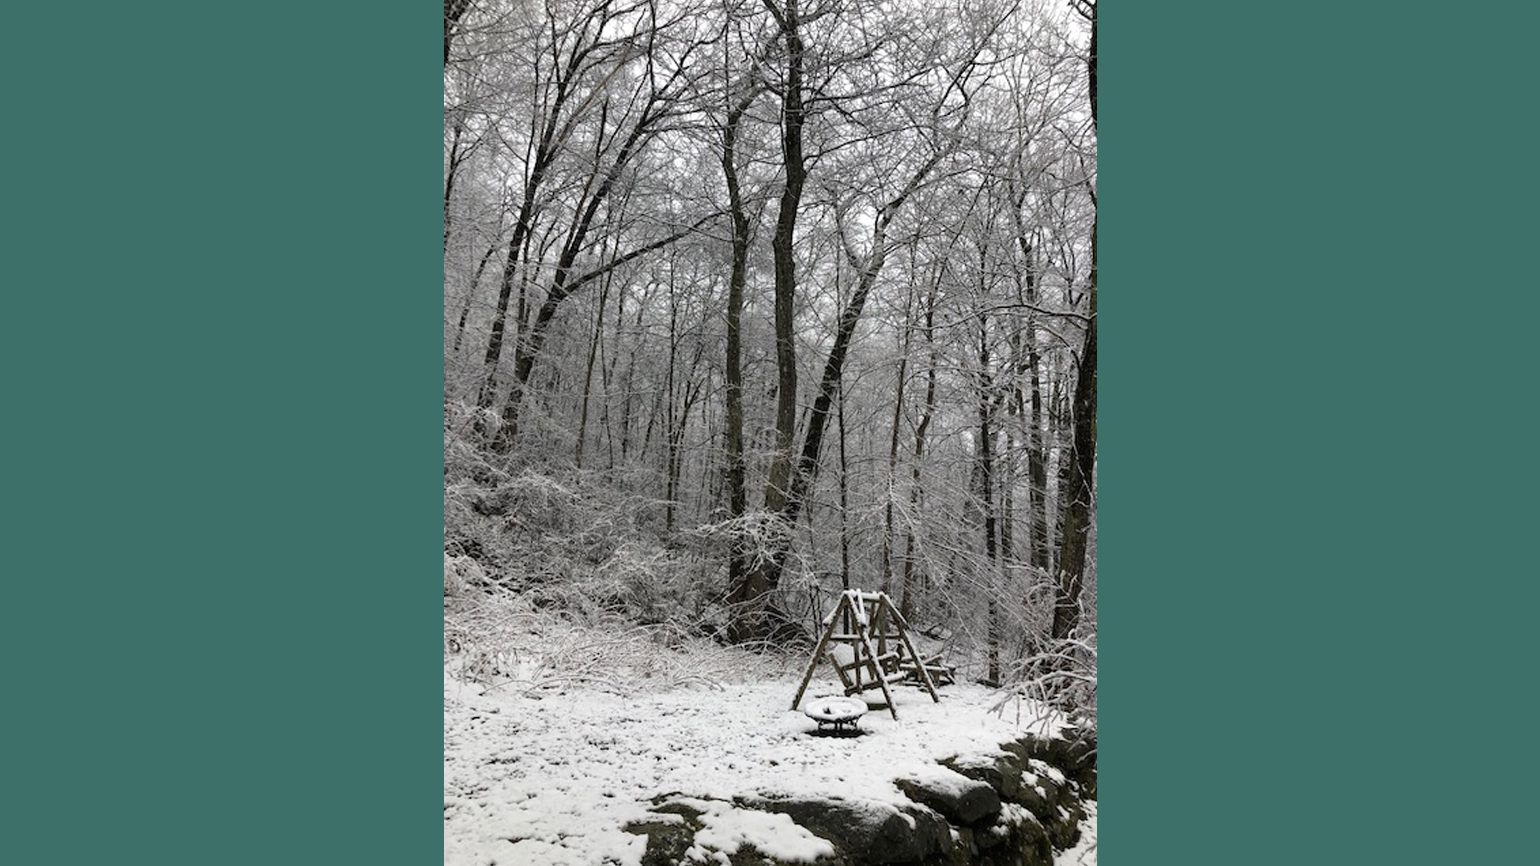 Late April snow in the Berkshires of Western Massachusetts.